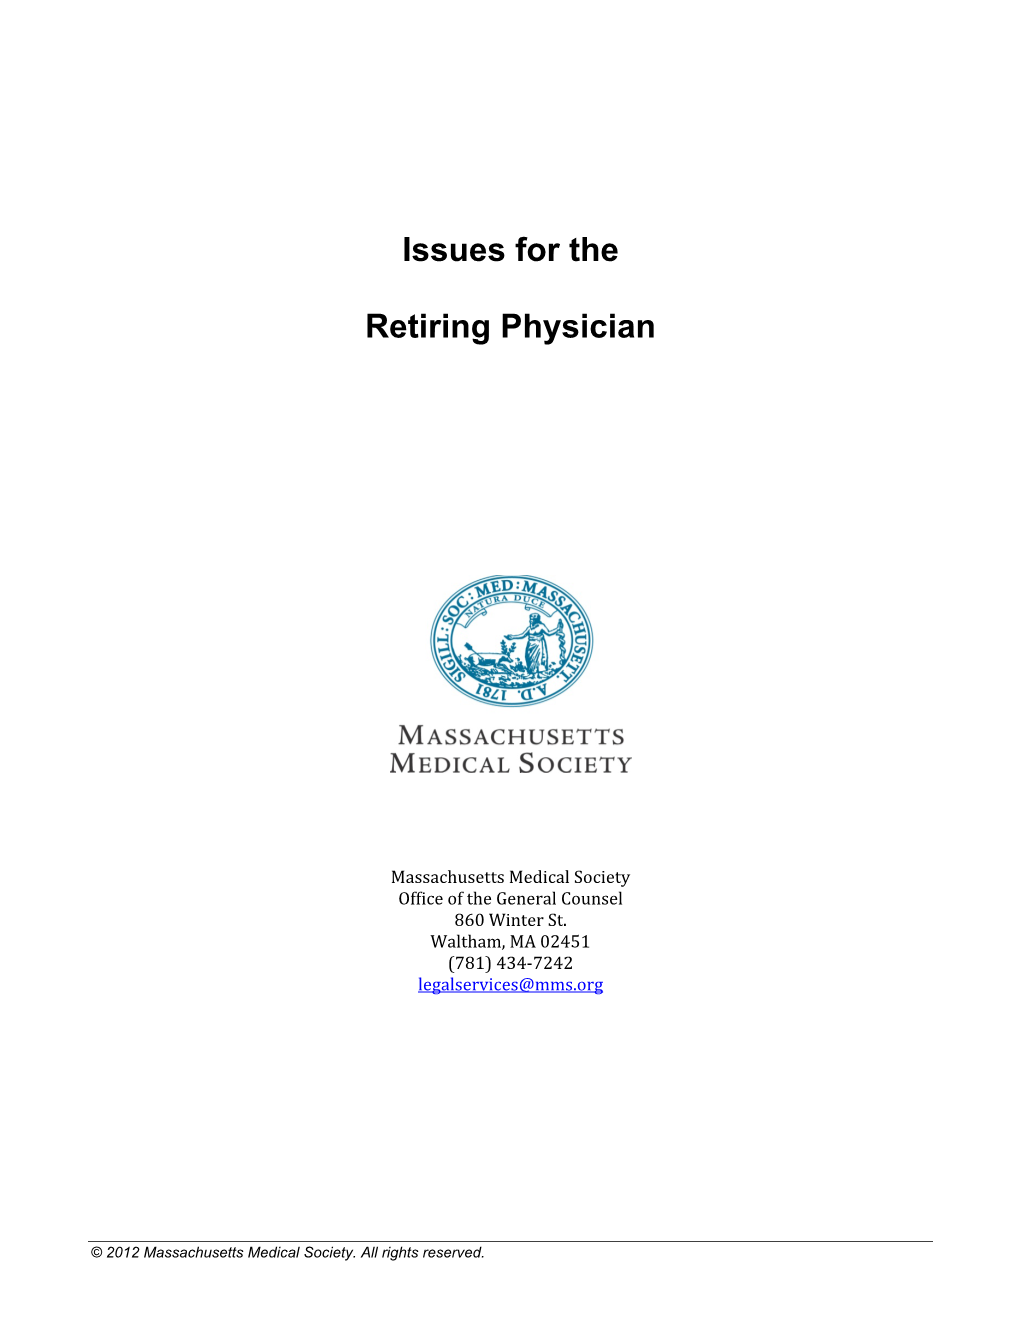 Issues for the Retiring Physician (Pdf)